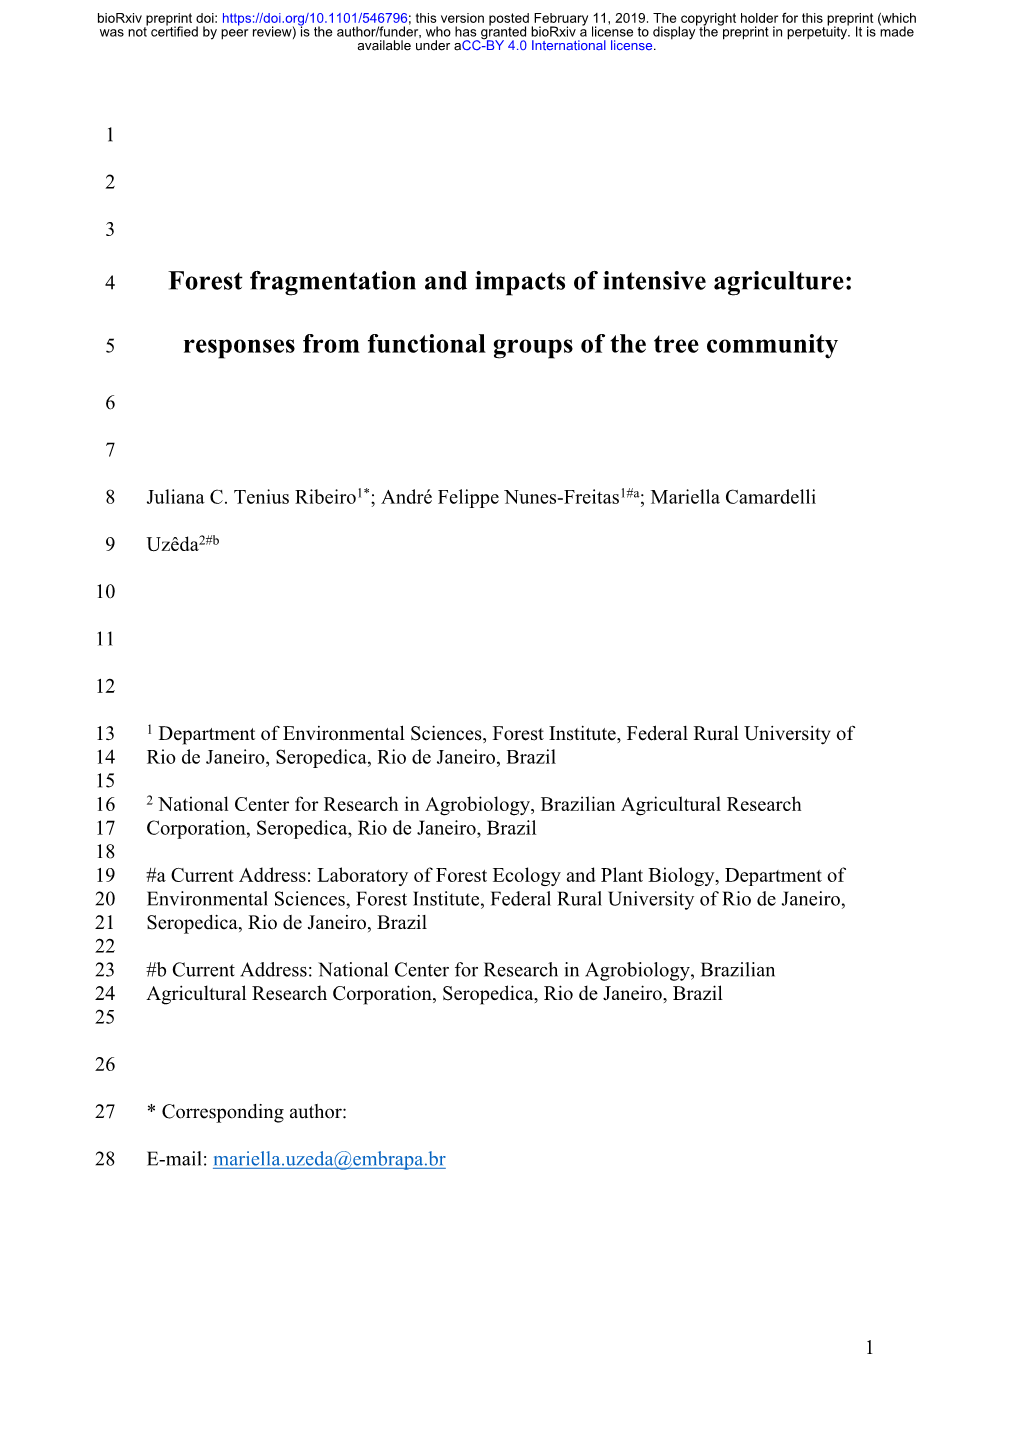 Forest Fragmentation and Impacts of Intensive Agriculture